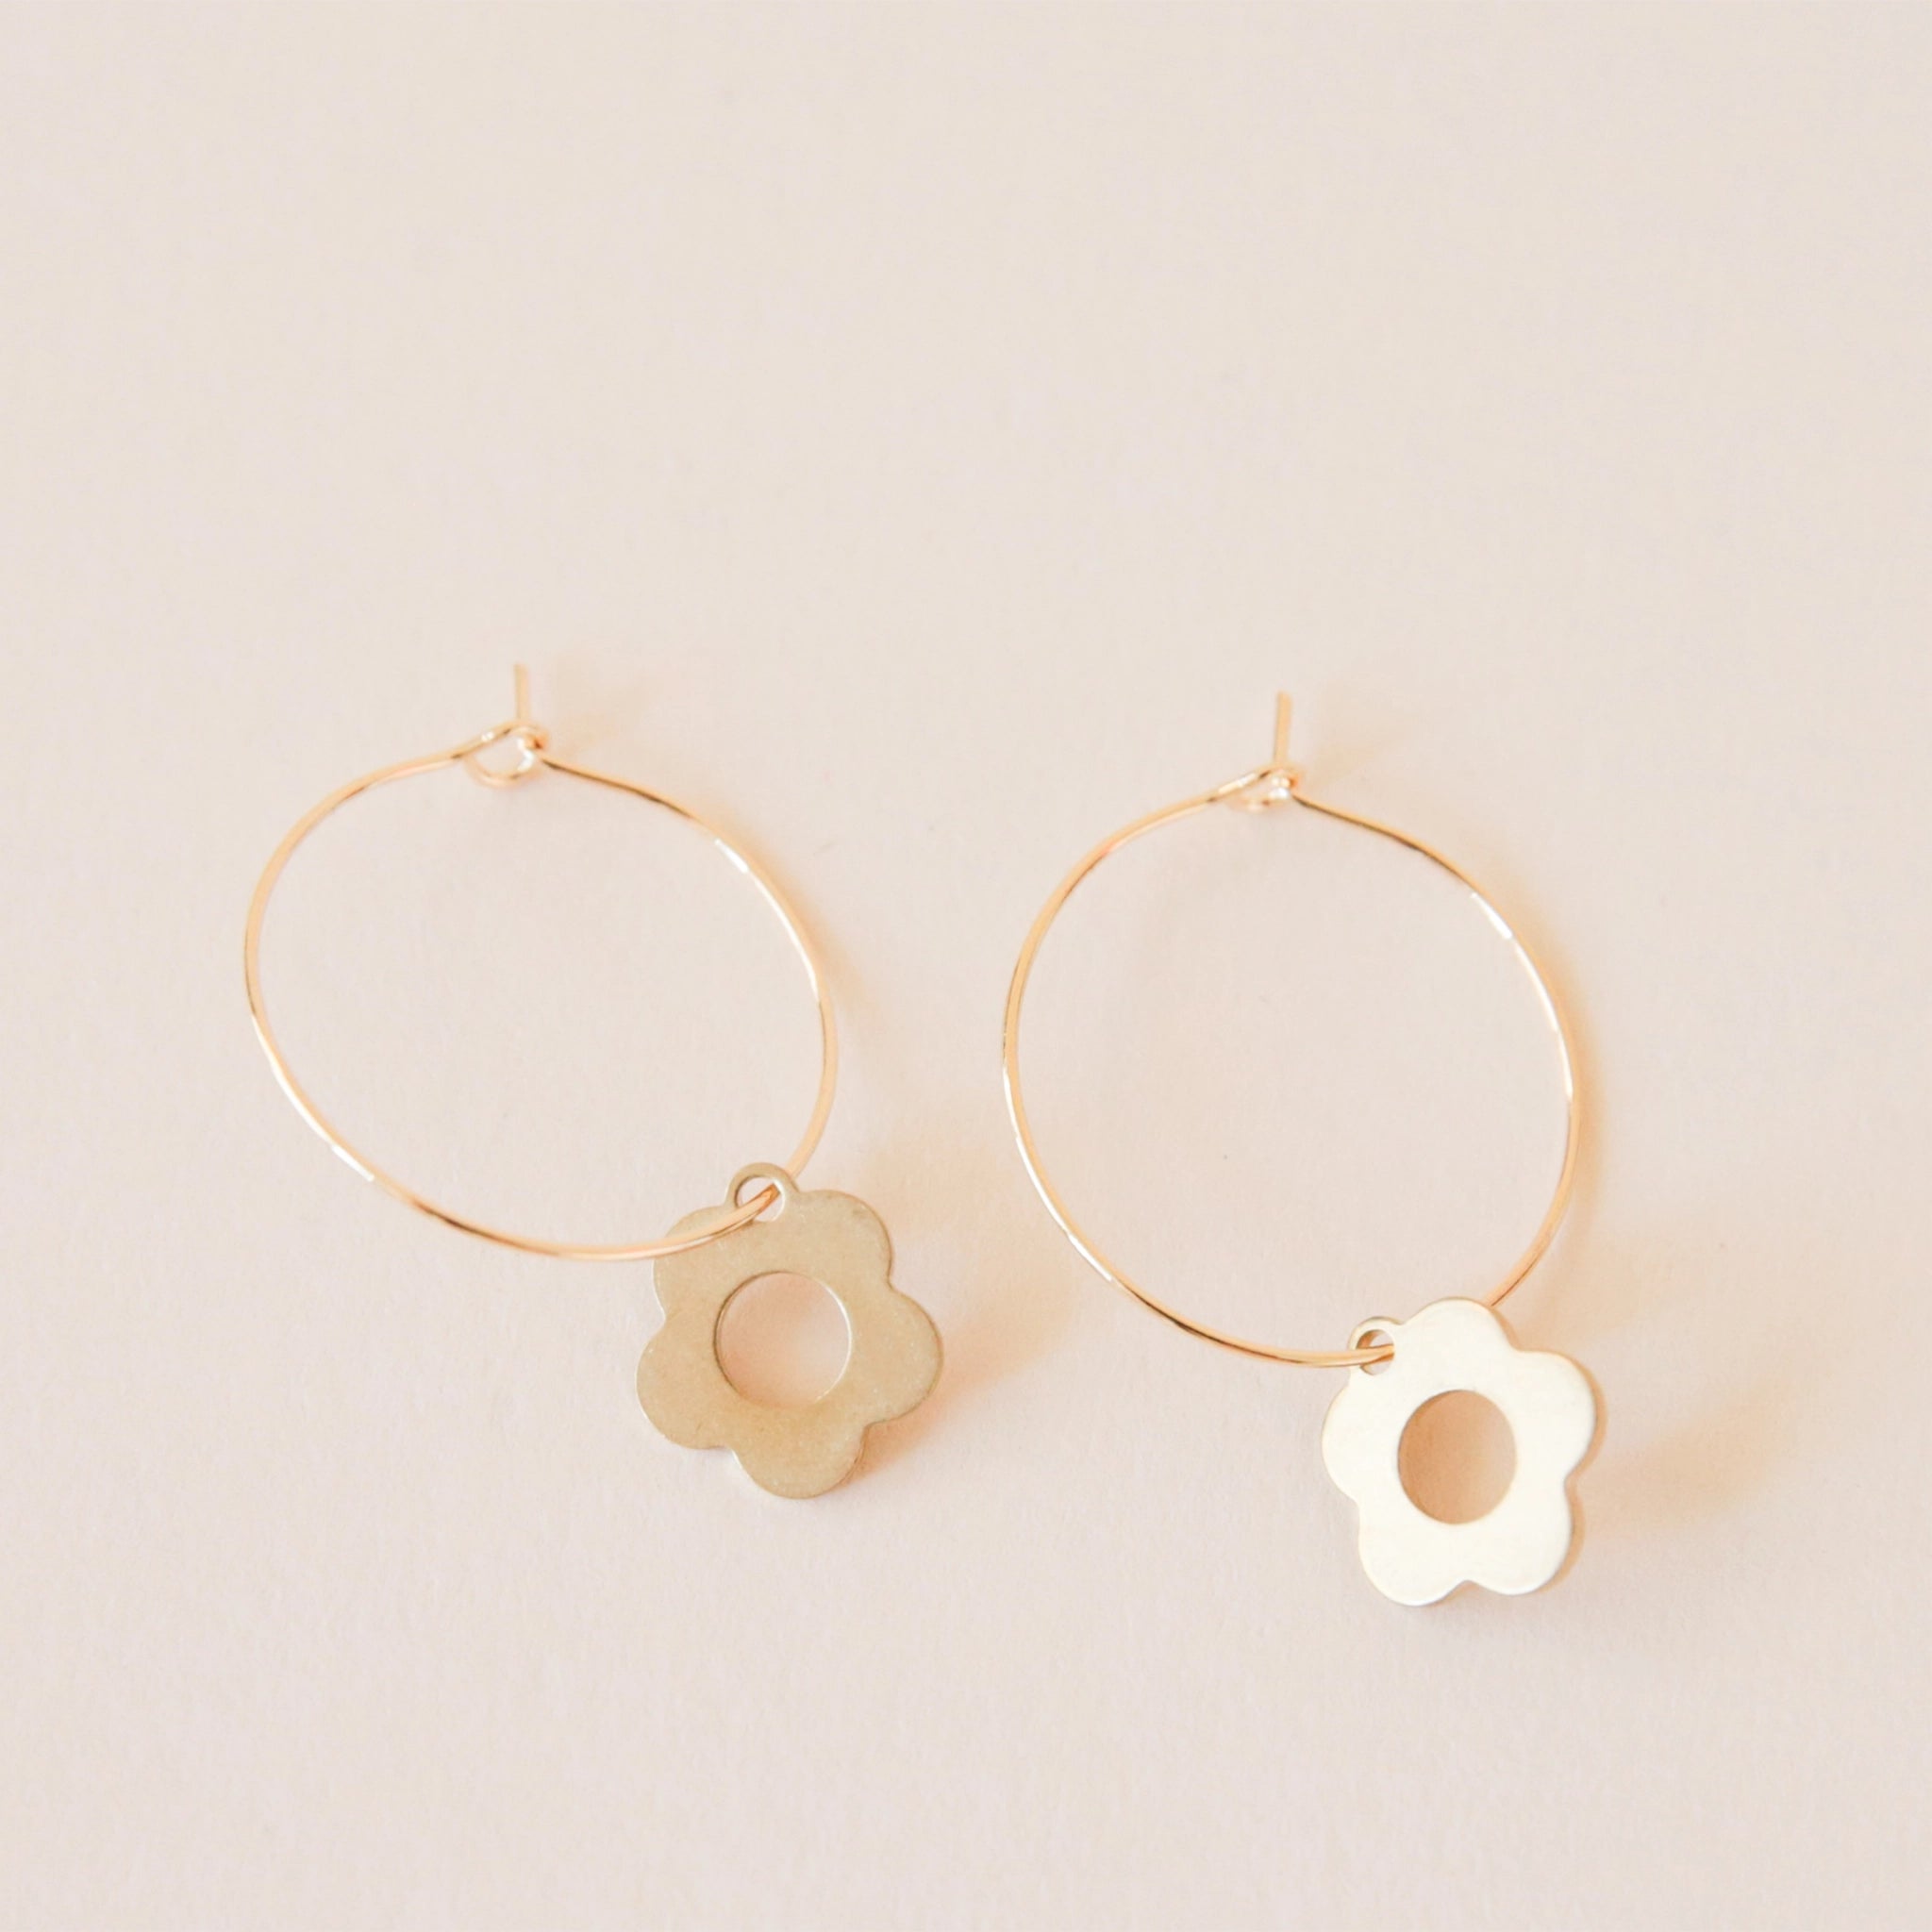 On a cream background is a dainty gold hoop earring with a smaller daisy charm dangling from the bottom edge. 